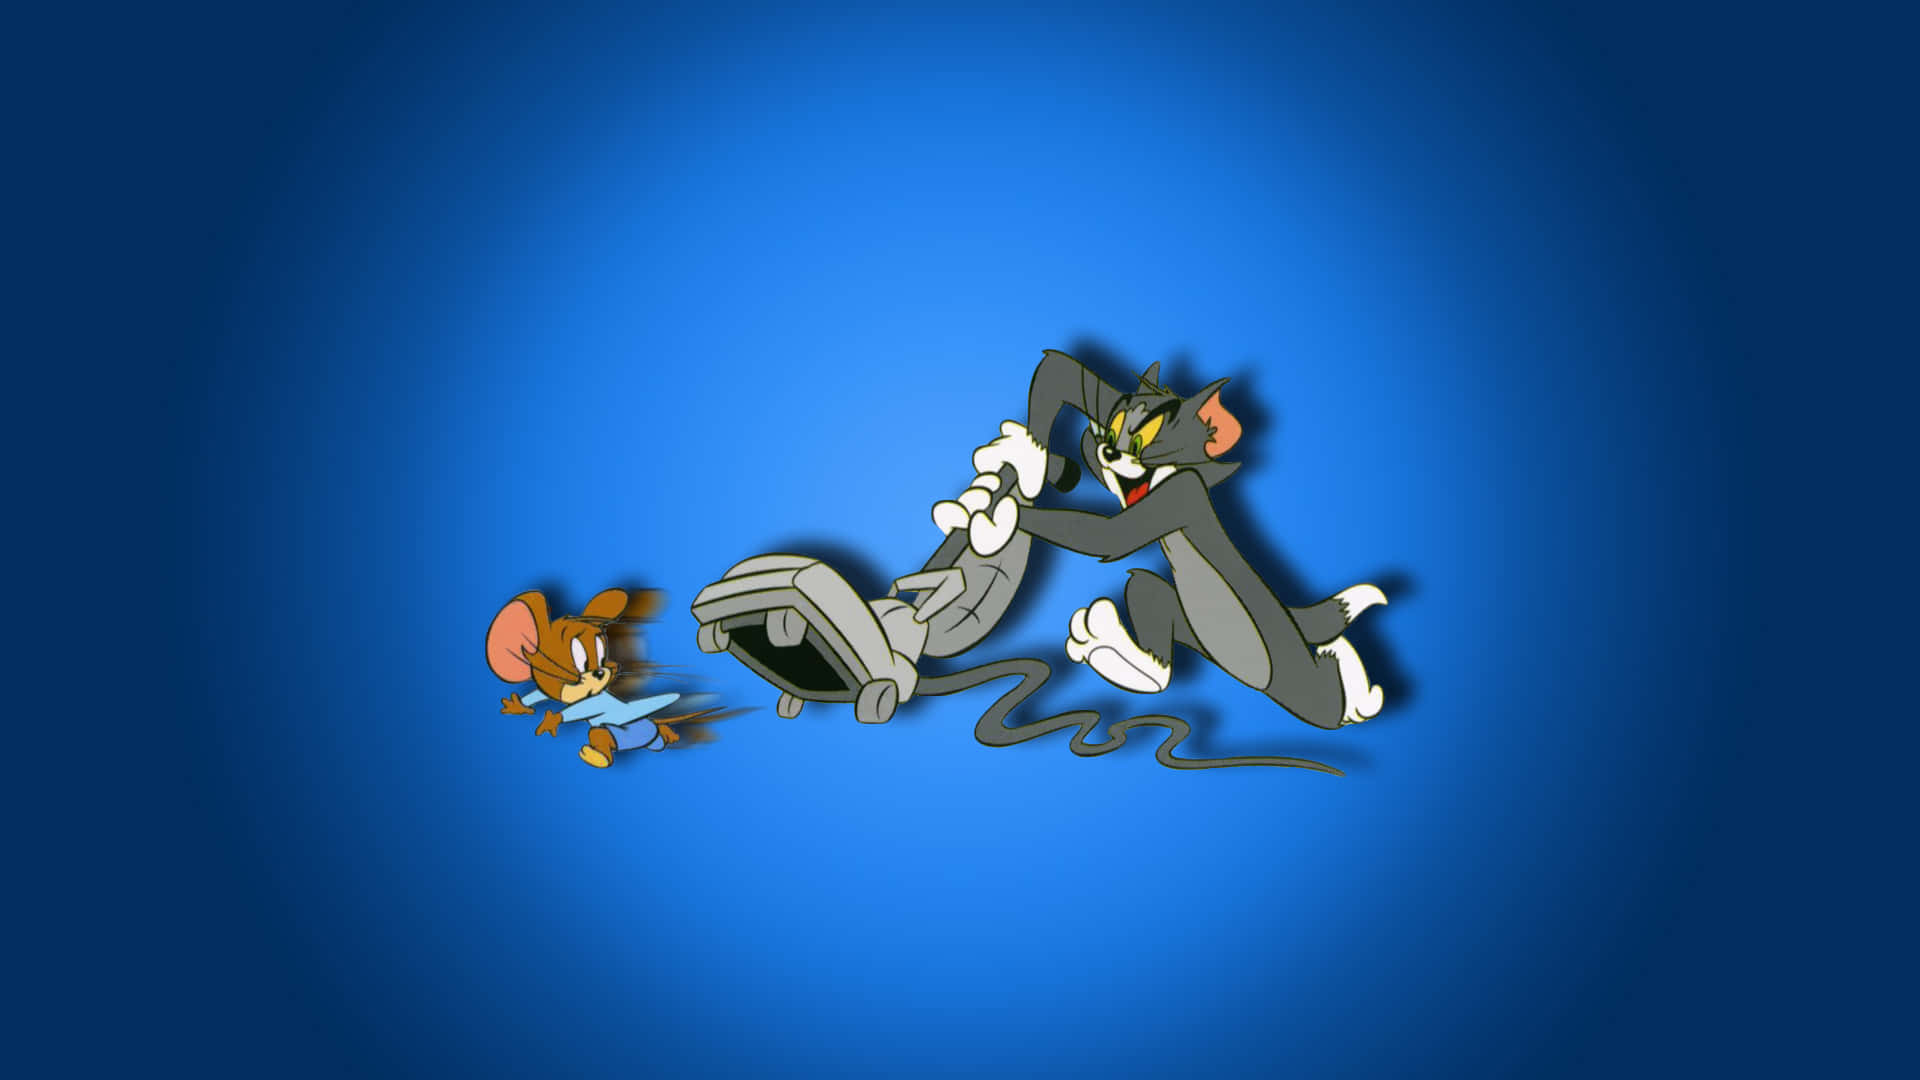 Tom and Jerry causing chaos together. Wallpaper